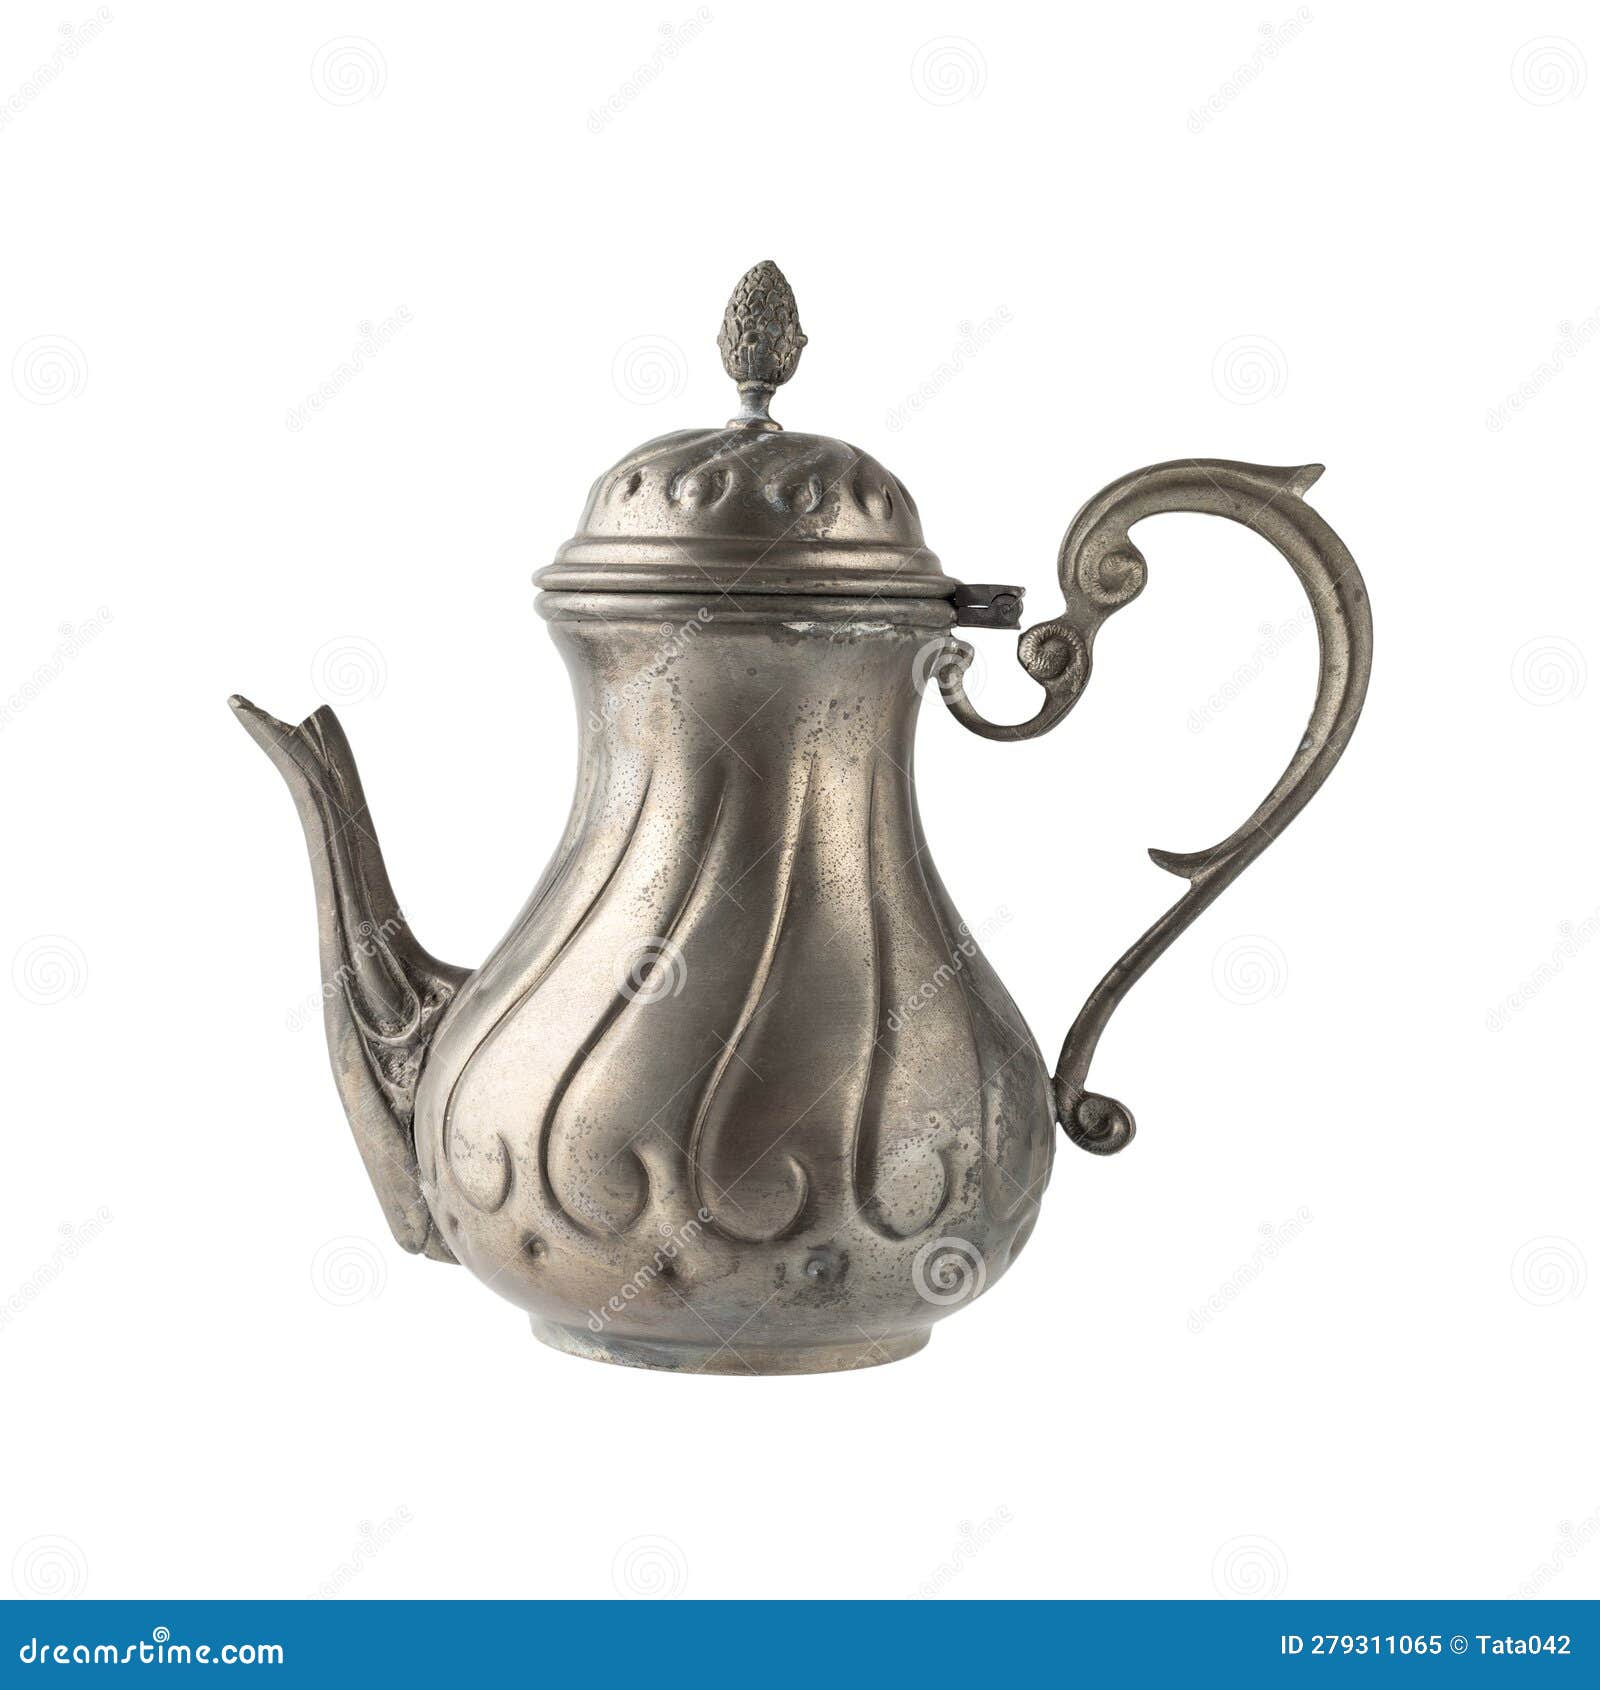 https://thumbs.dreamstime.com/z/old-grunge-craft-tin-coffee-pot-isolated-white-old-grunge-craft-tin-coffee-pot-isolated-white-background-antique-pewter-279311065.jpg